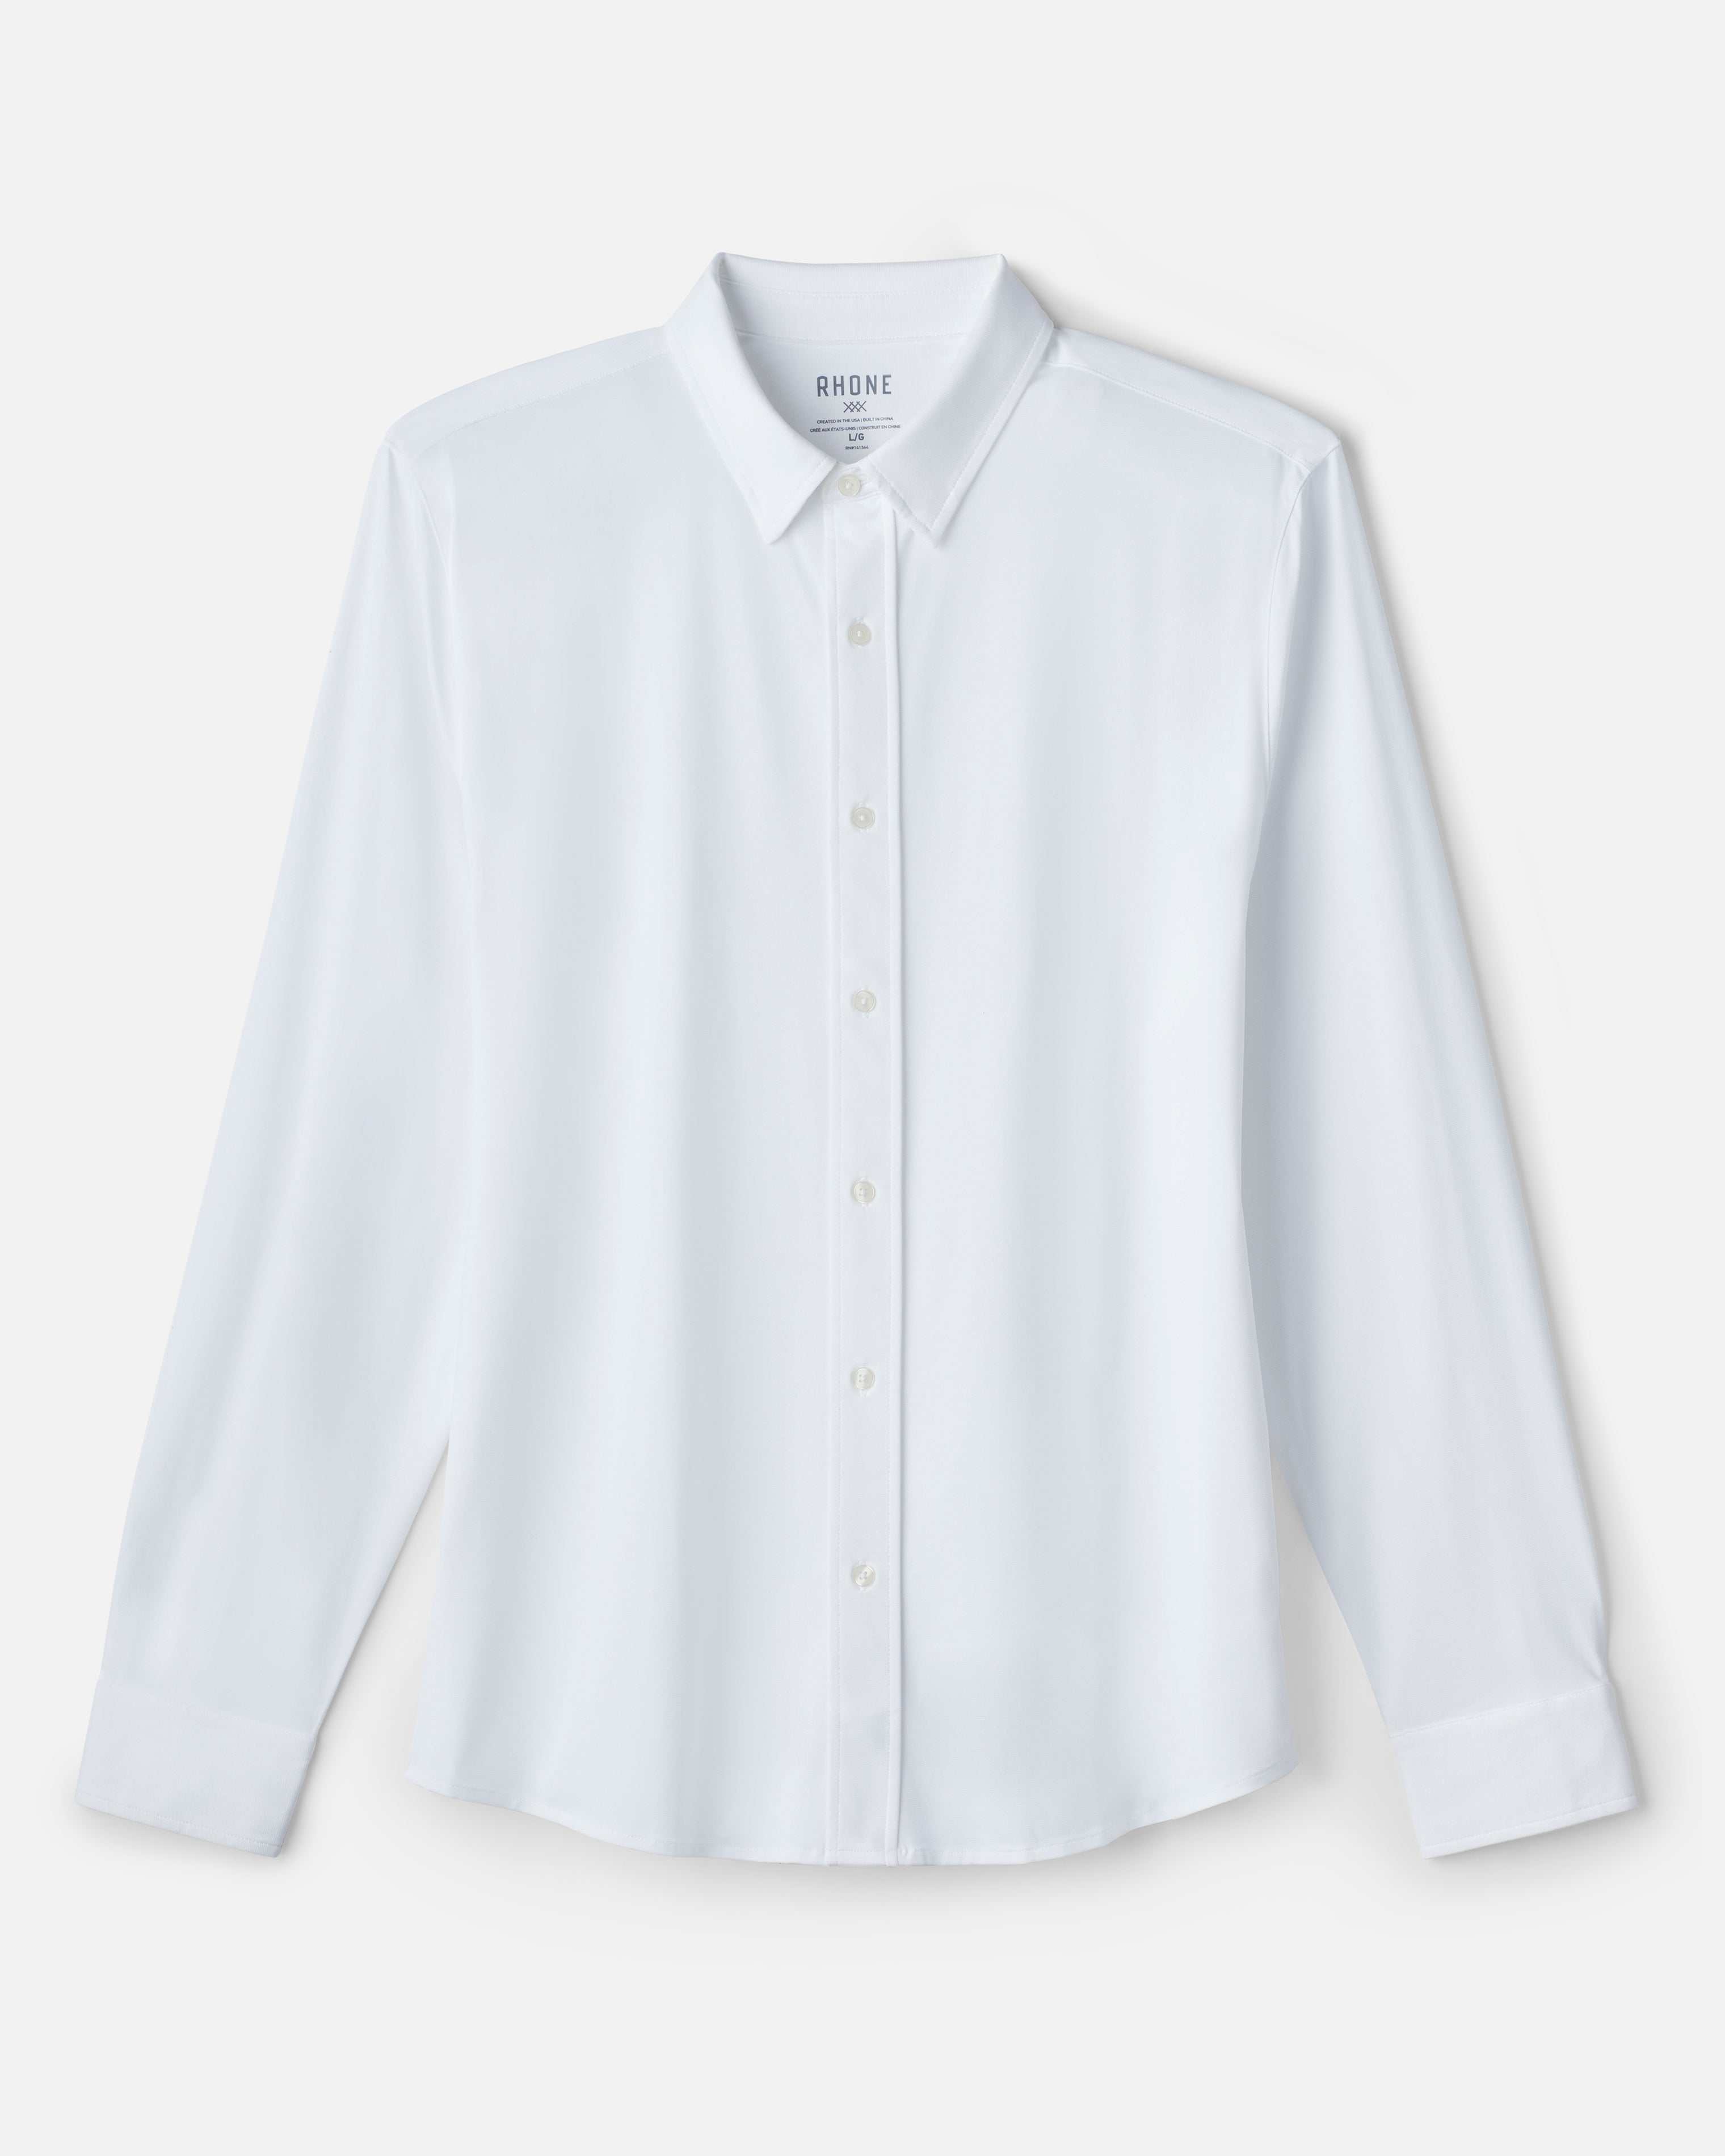 White Long Sleeve Button Up Shirt